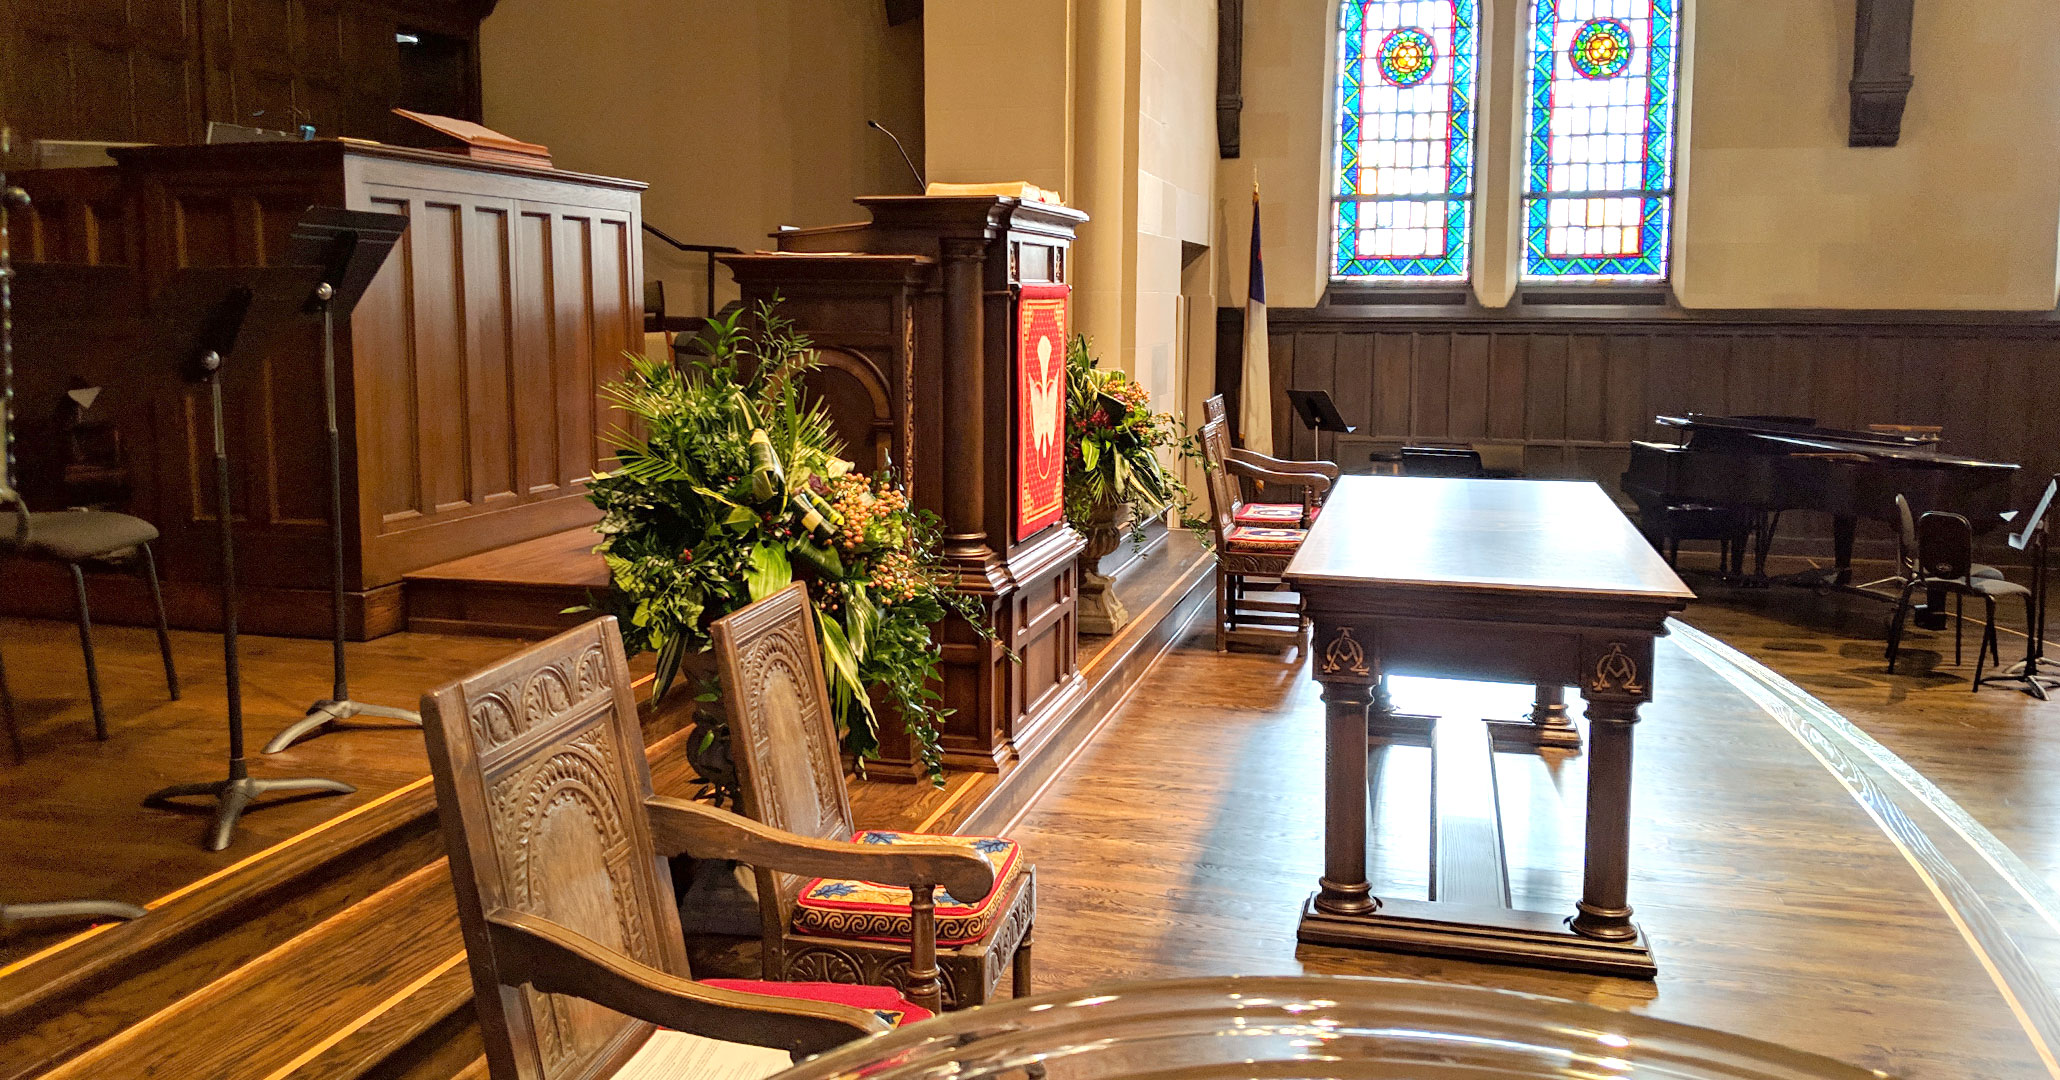 Historic Preservationists and Interior Designers at Boudreaux worked with First Presbyterian Church in Spartanburg, SC to design the alter pieces.